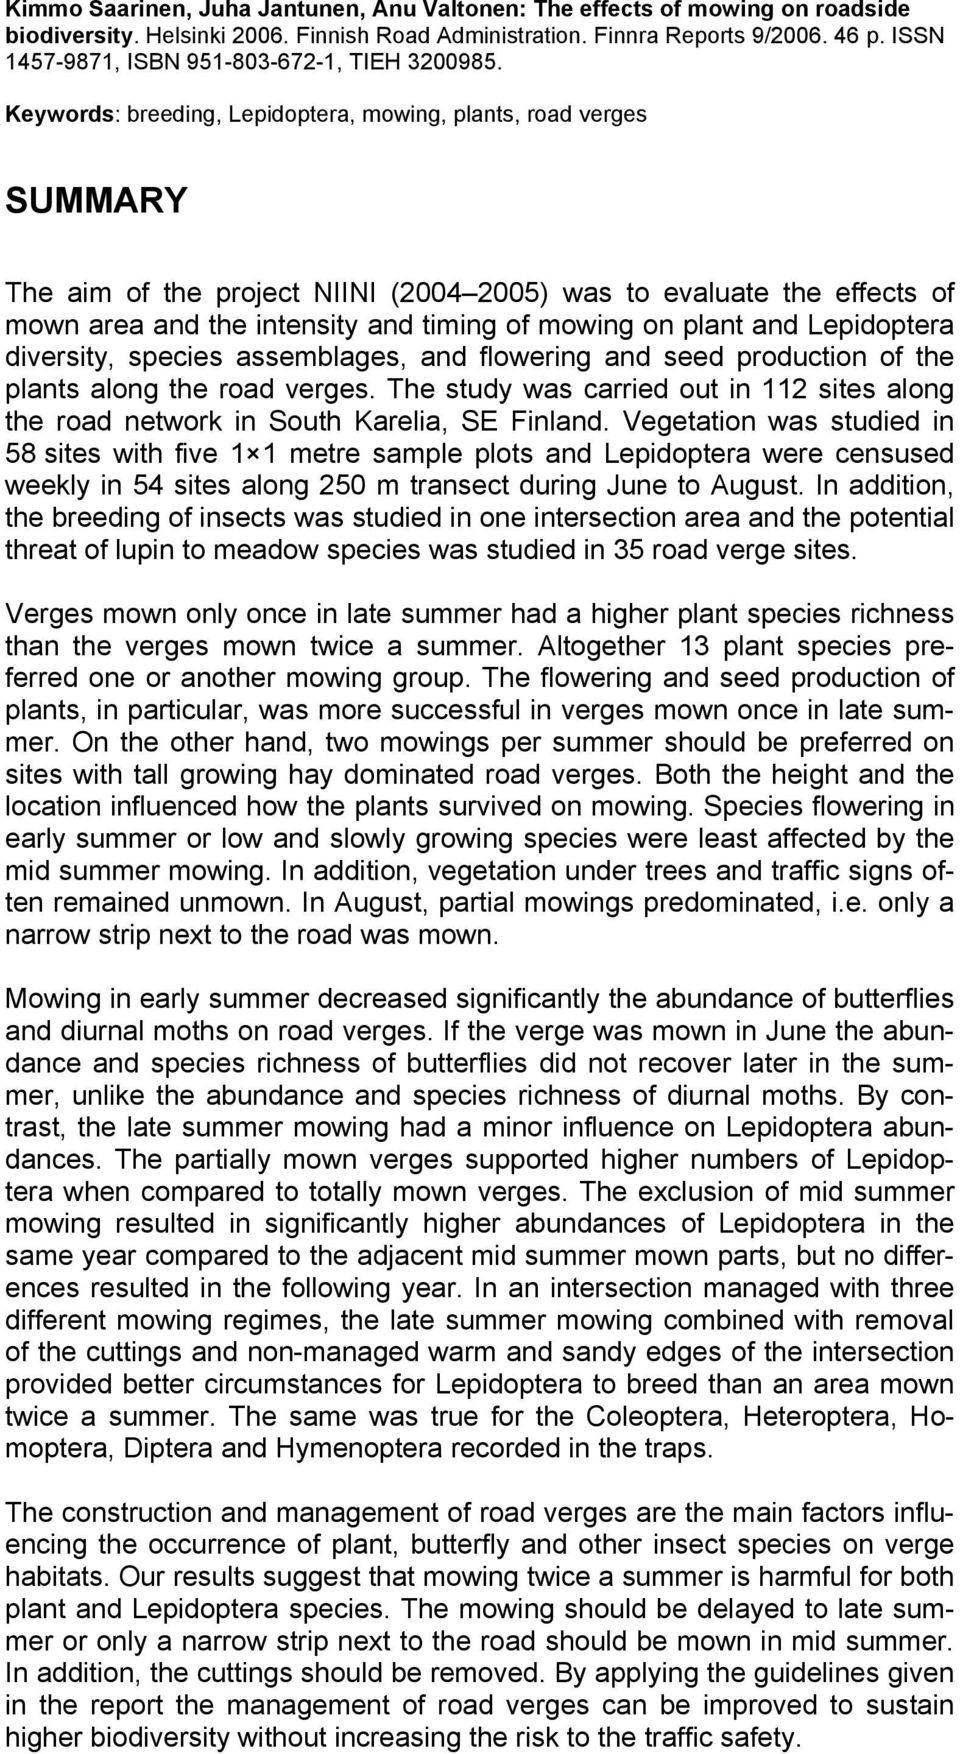 Keywords: breeding, Lepidoptera, mowing, plants, road verges SUMMARY The aim of the project NIINI (2004 2005) was to evaluate the effects of mown area and the intensity and timing of mowing on plant